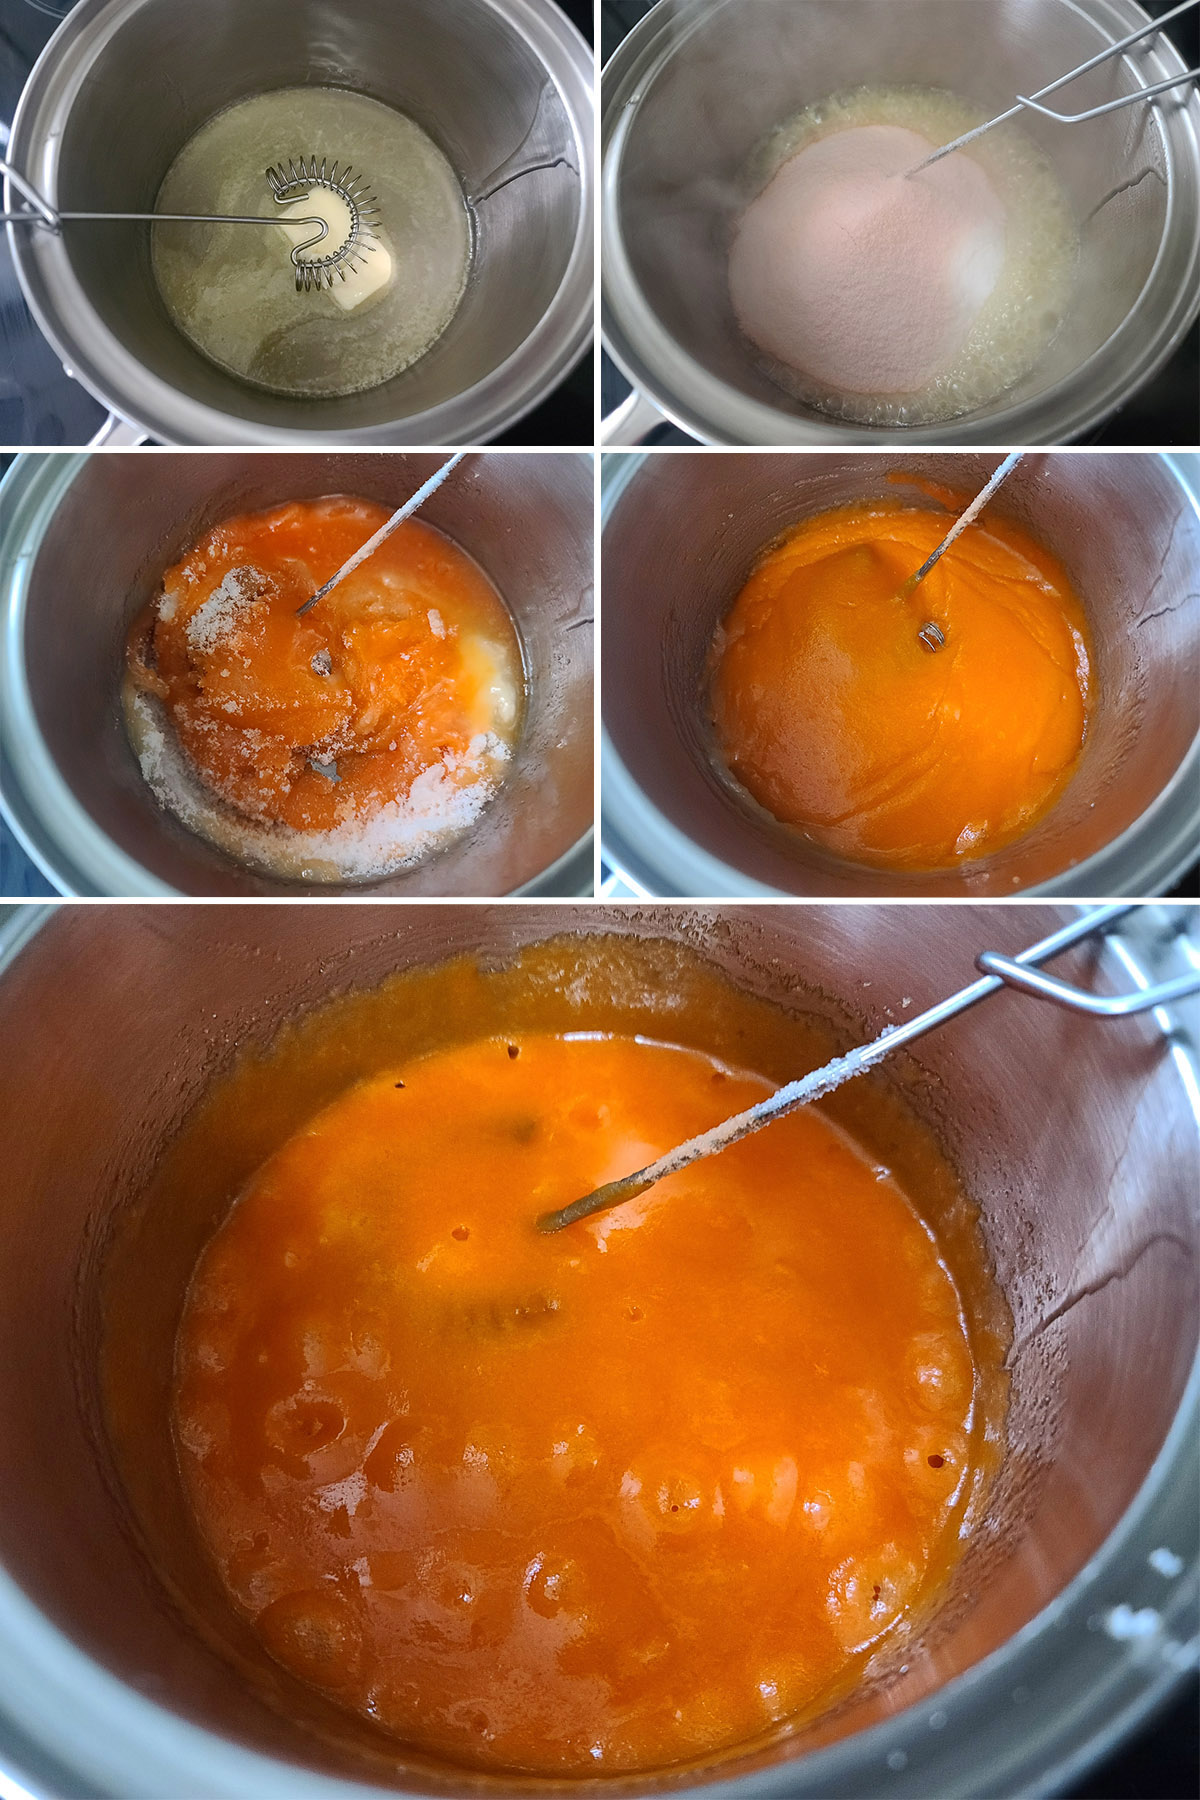 A 5 part image showing the ingredients for the orange glaze mixed together and simmering.